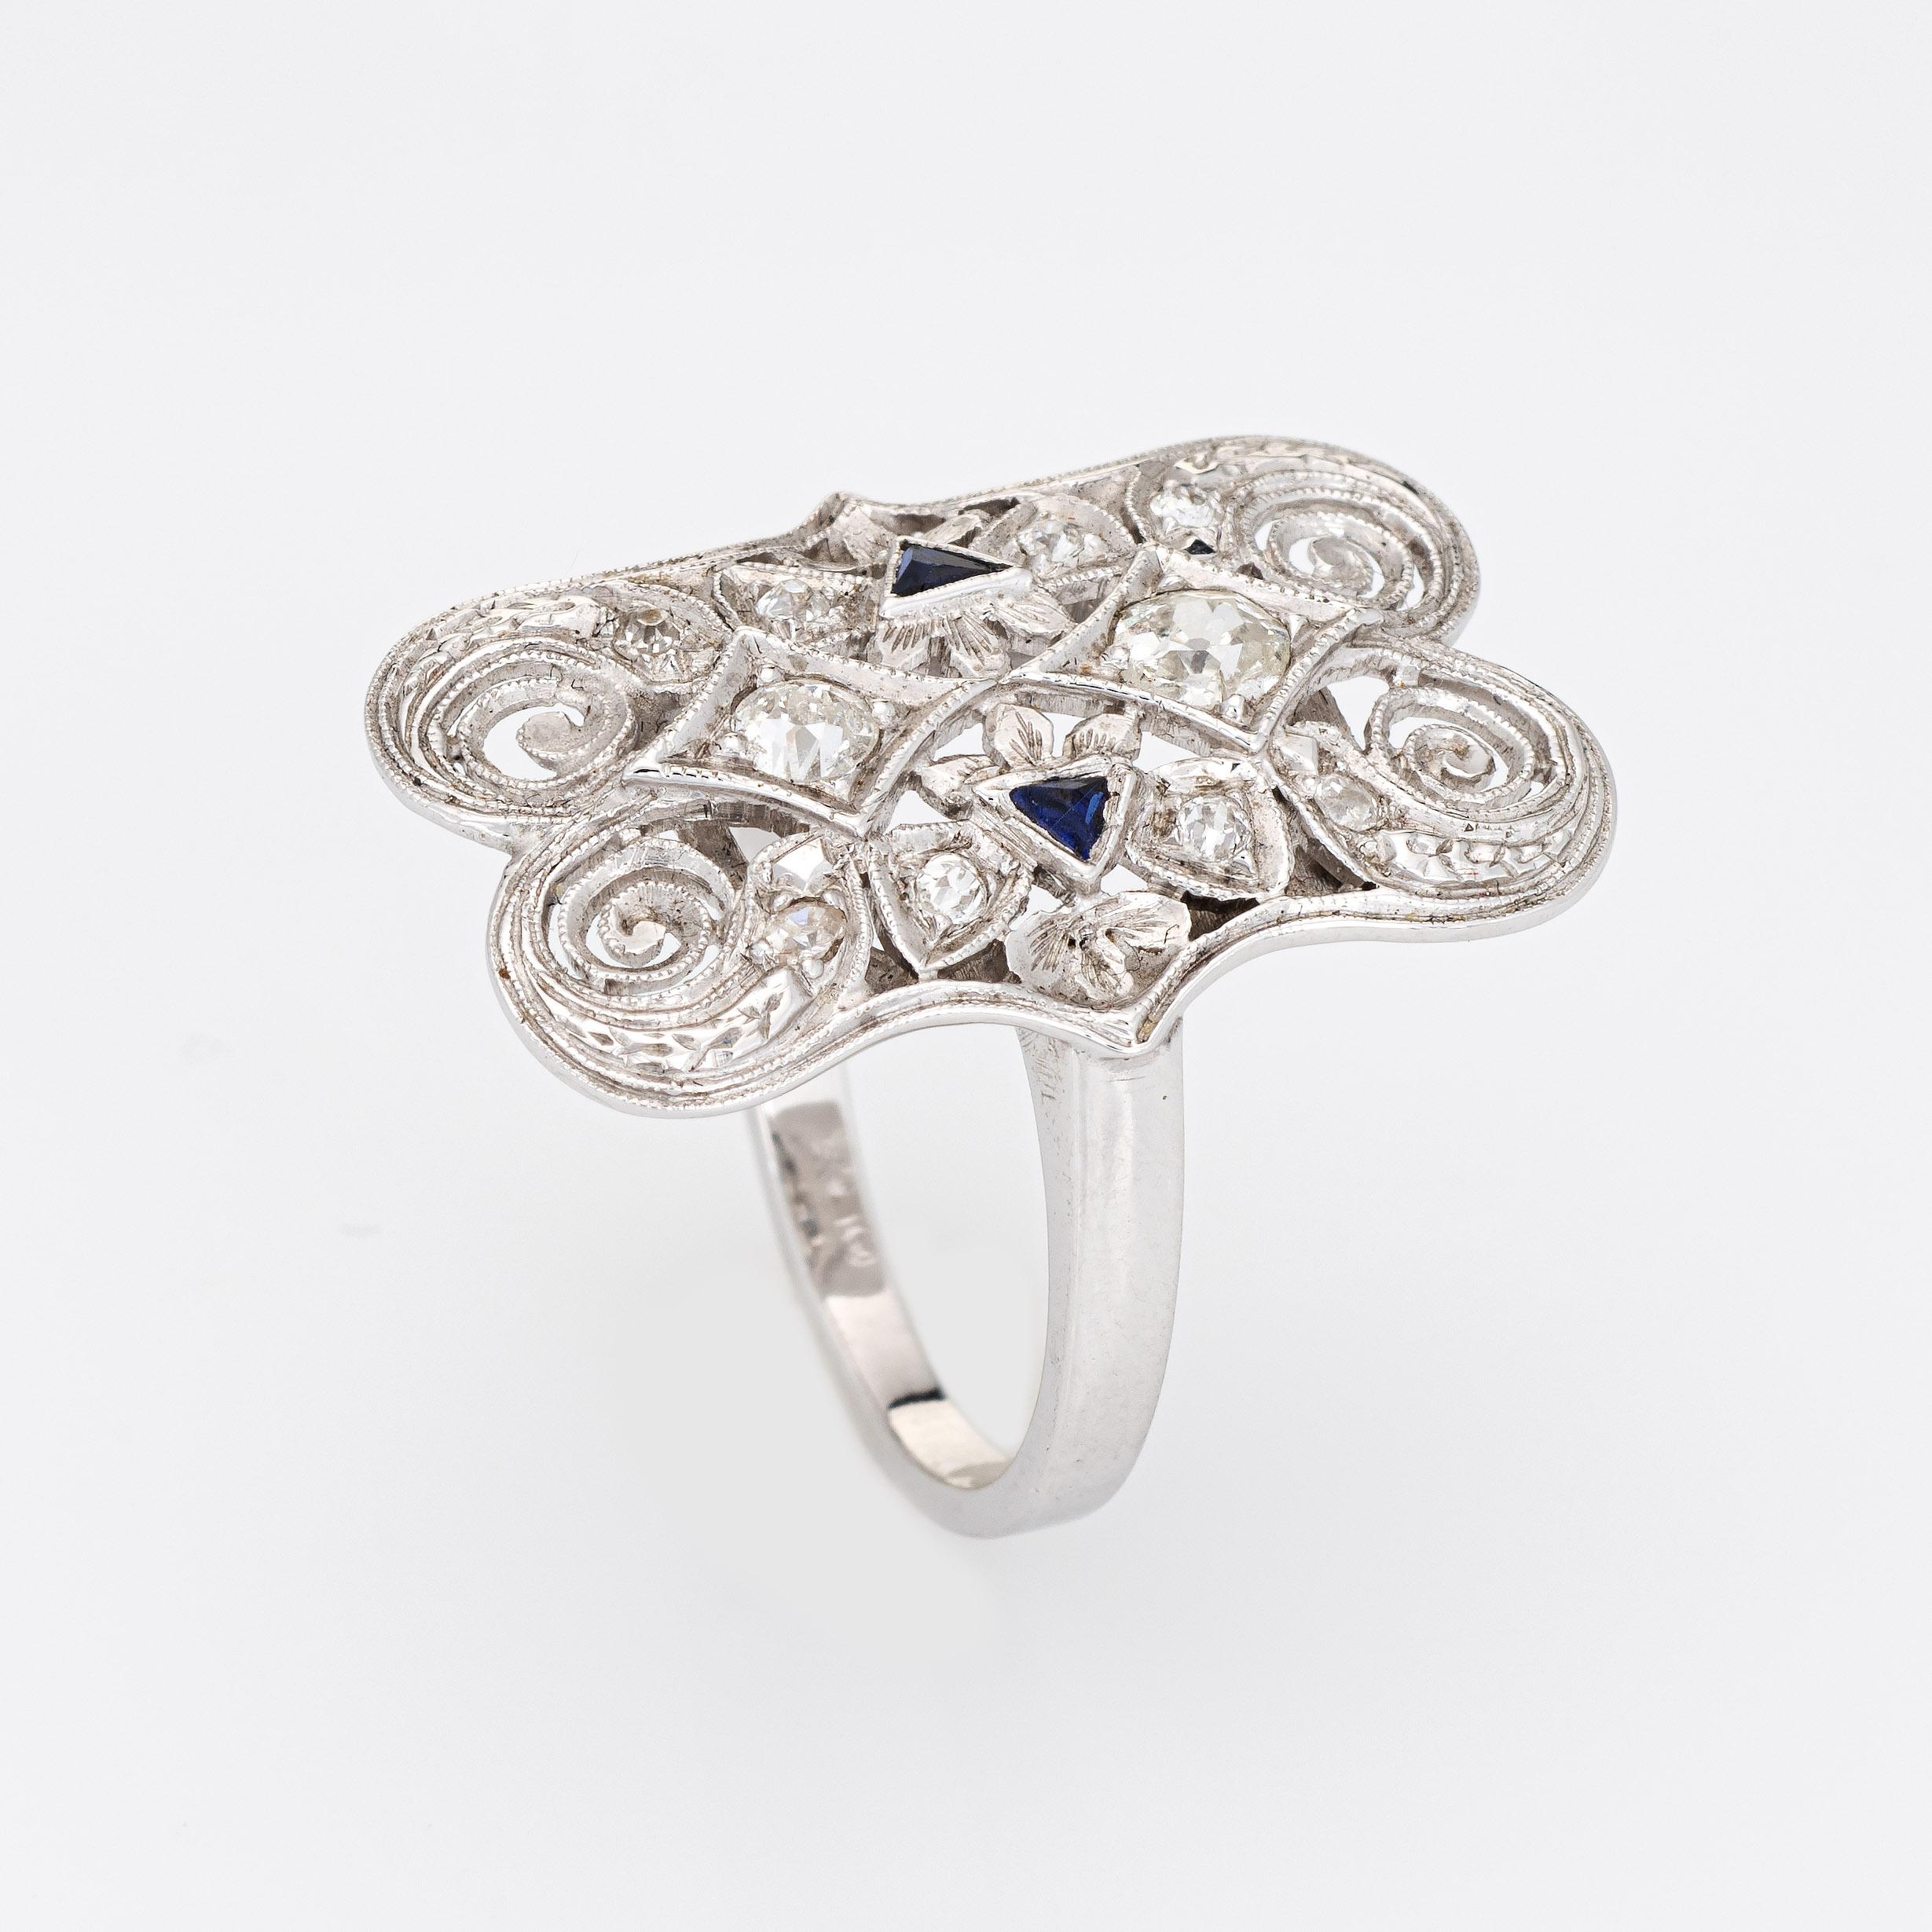 Finely detailed vintage Art Deco era diamond & sapphire ring (circa 1920s to 1930s) crafted in 14k white gold. 

Two old mine cut diamonds are estimated at 0.10 carats each, accented with a further 8 estimated 0.02 carat diamonds. The total diamond